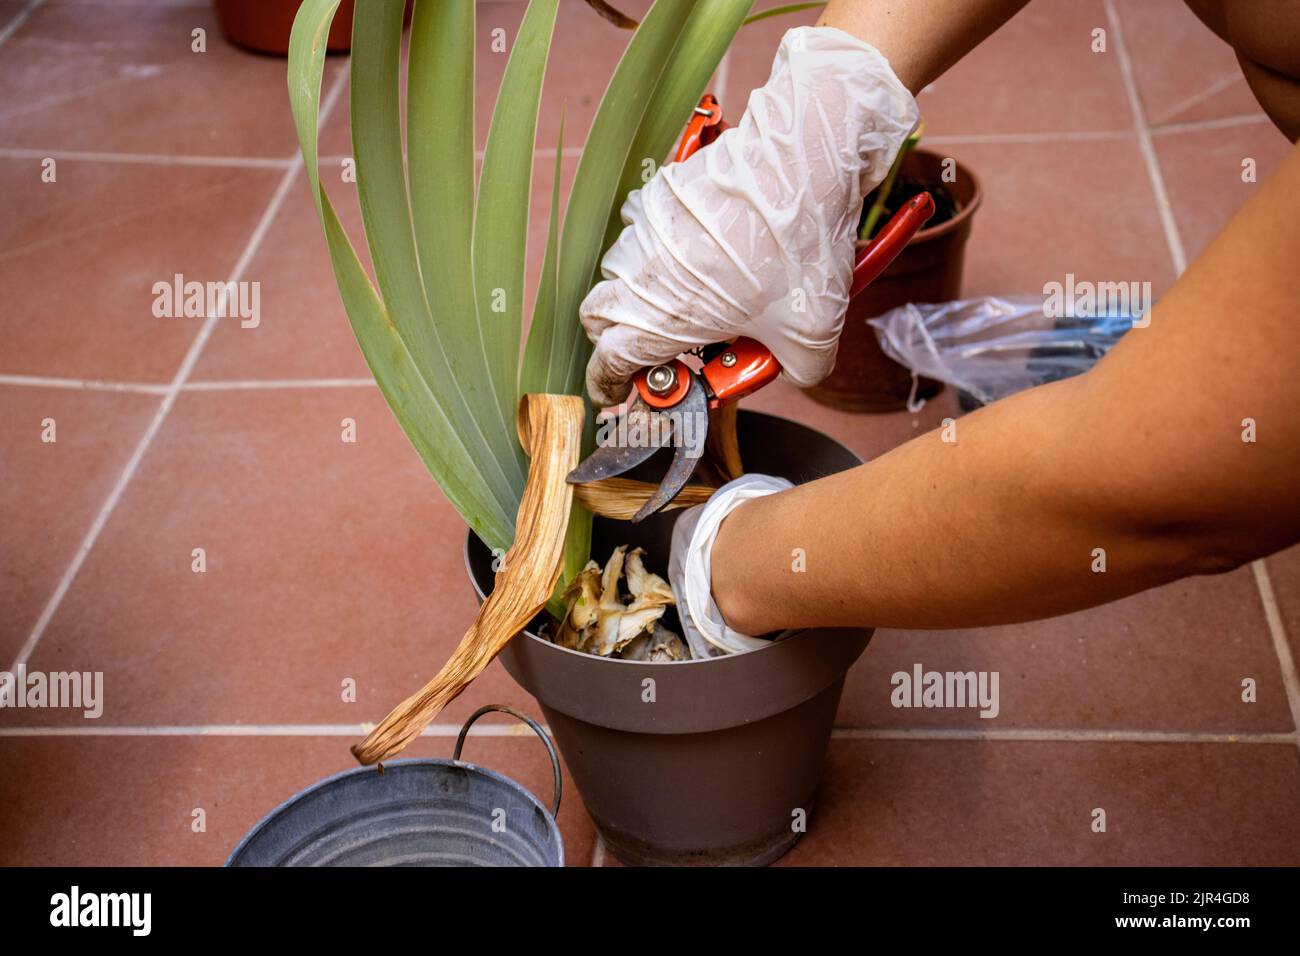 hands of a young girl pruning a plant in her garden Stock Photo